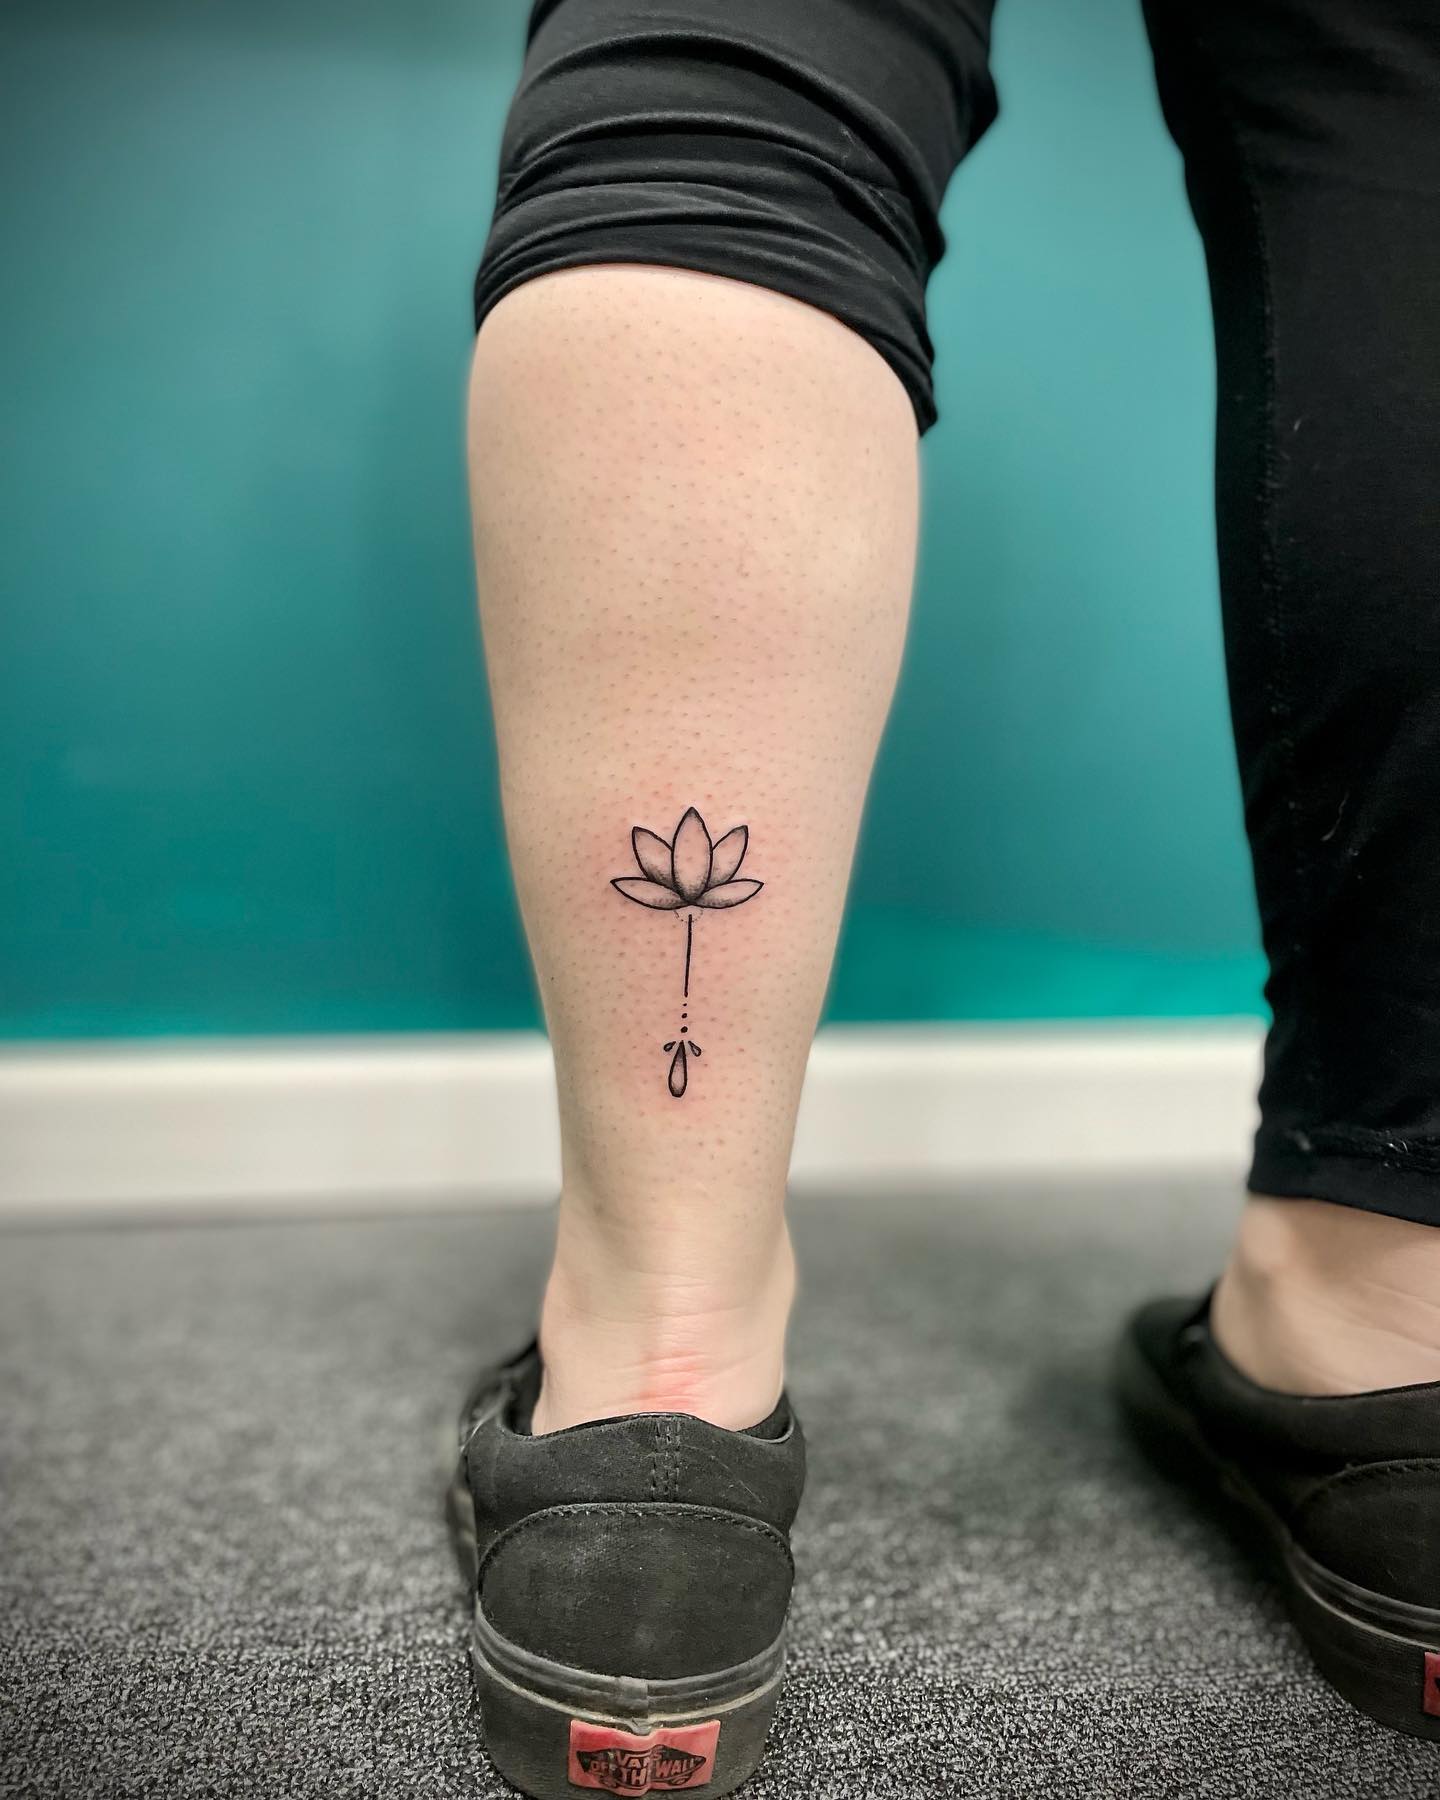 Tiny lotus flower tattoo on the ankle